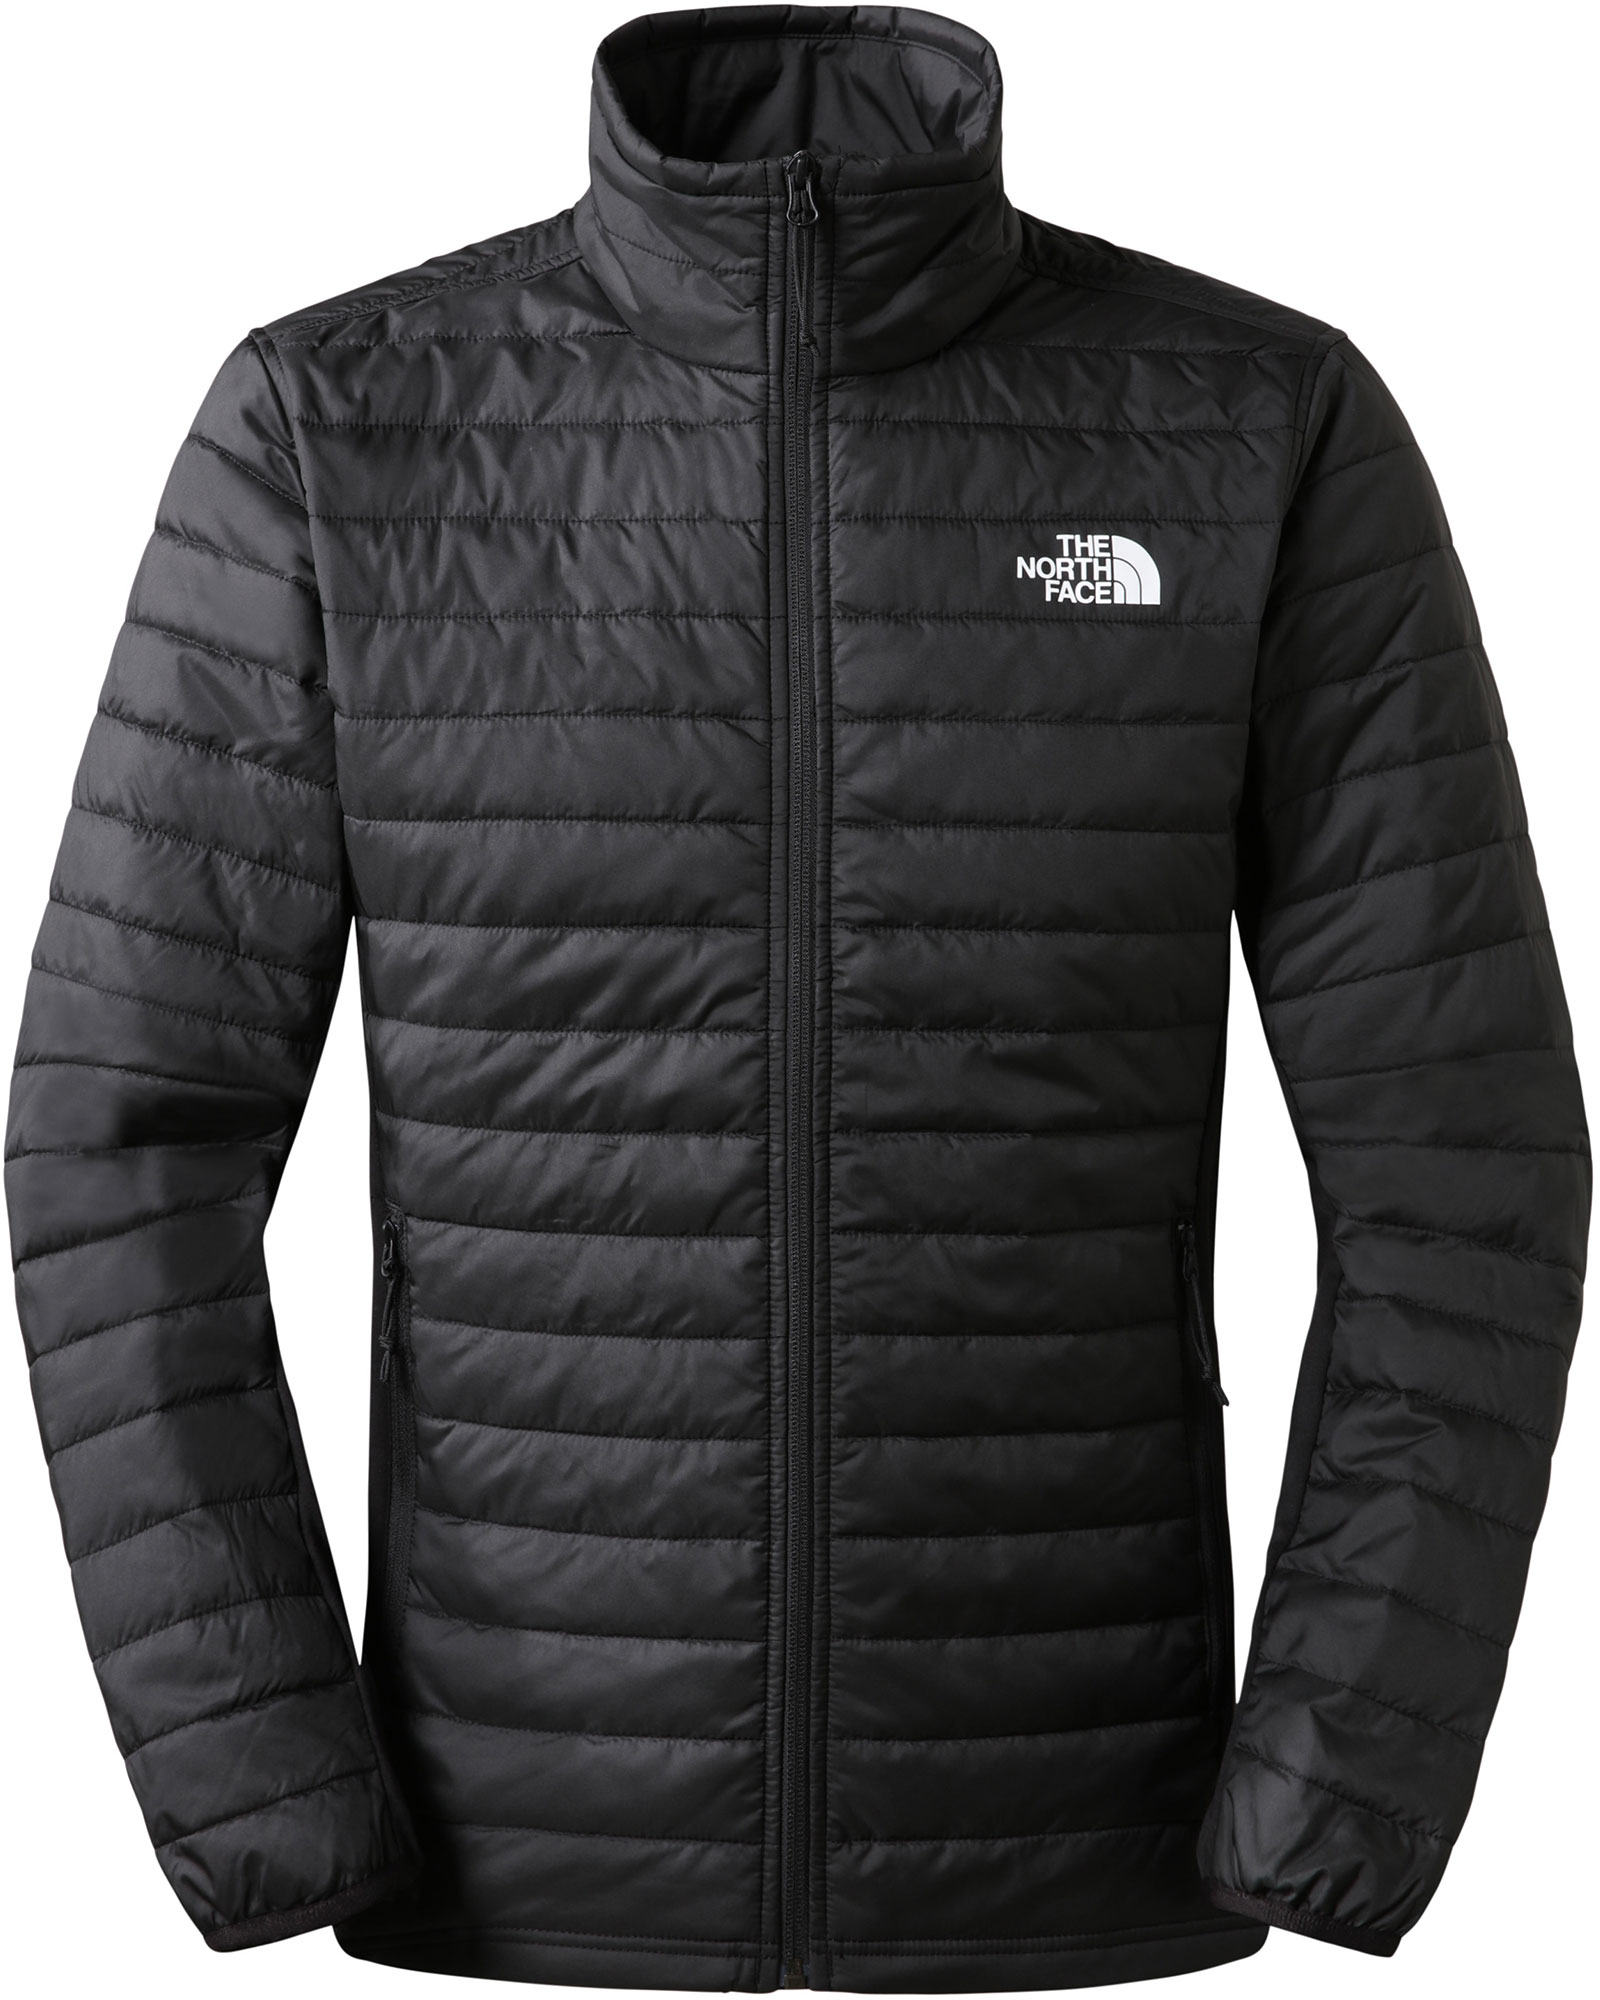 The North Face Nuptse Mittens